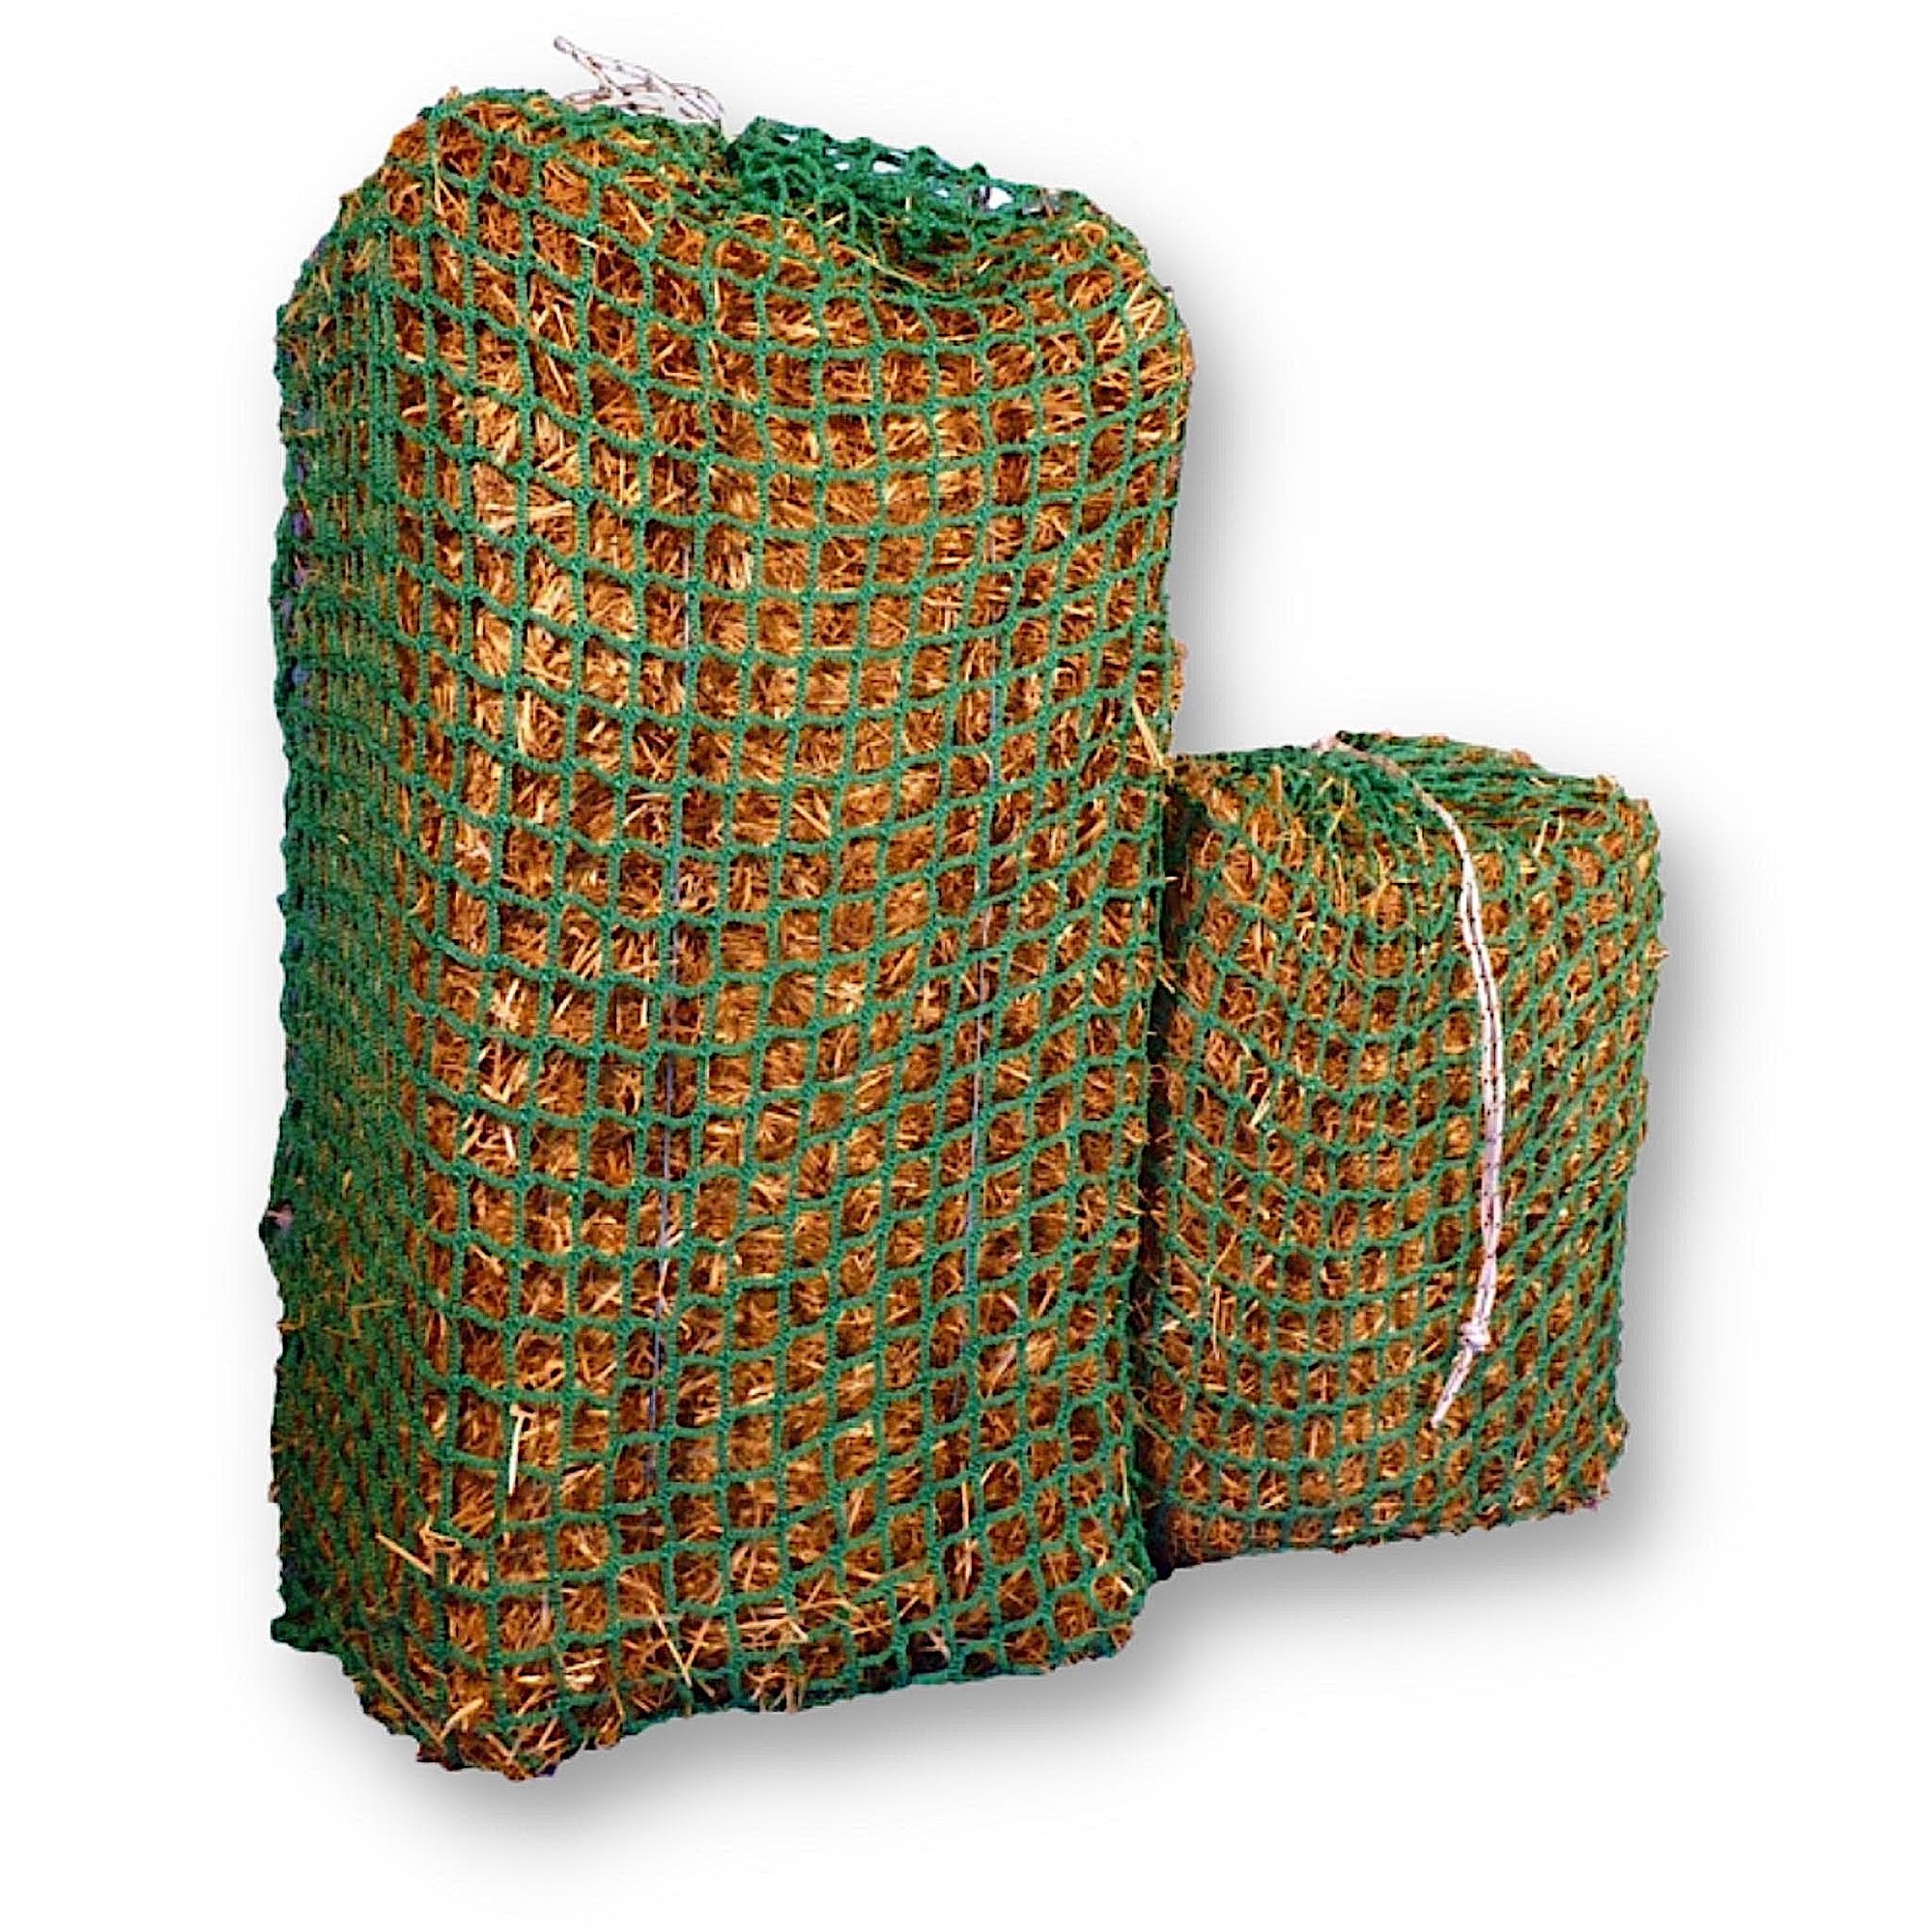 Green hay net with white drawstring